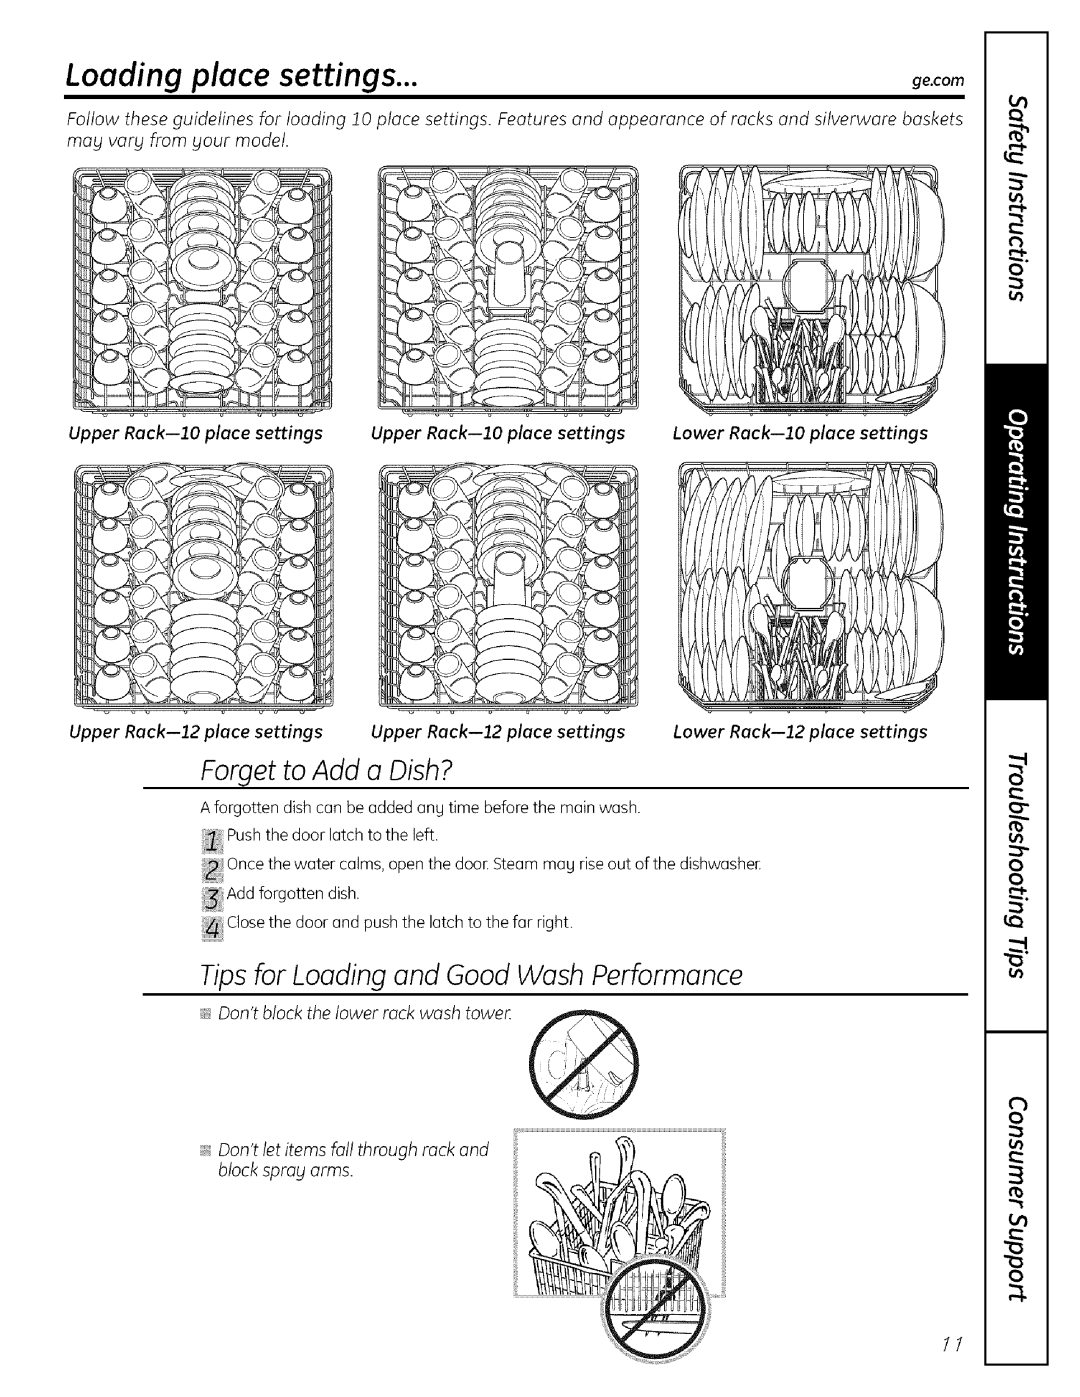 GE ADW! 000 SERIES Loading place settings, Forget to Add a Dish?, Tips for Loading and Good Wash Performance 